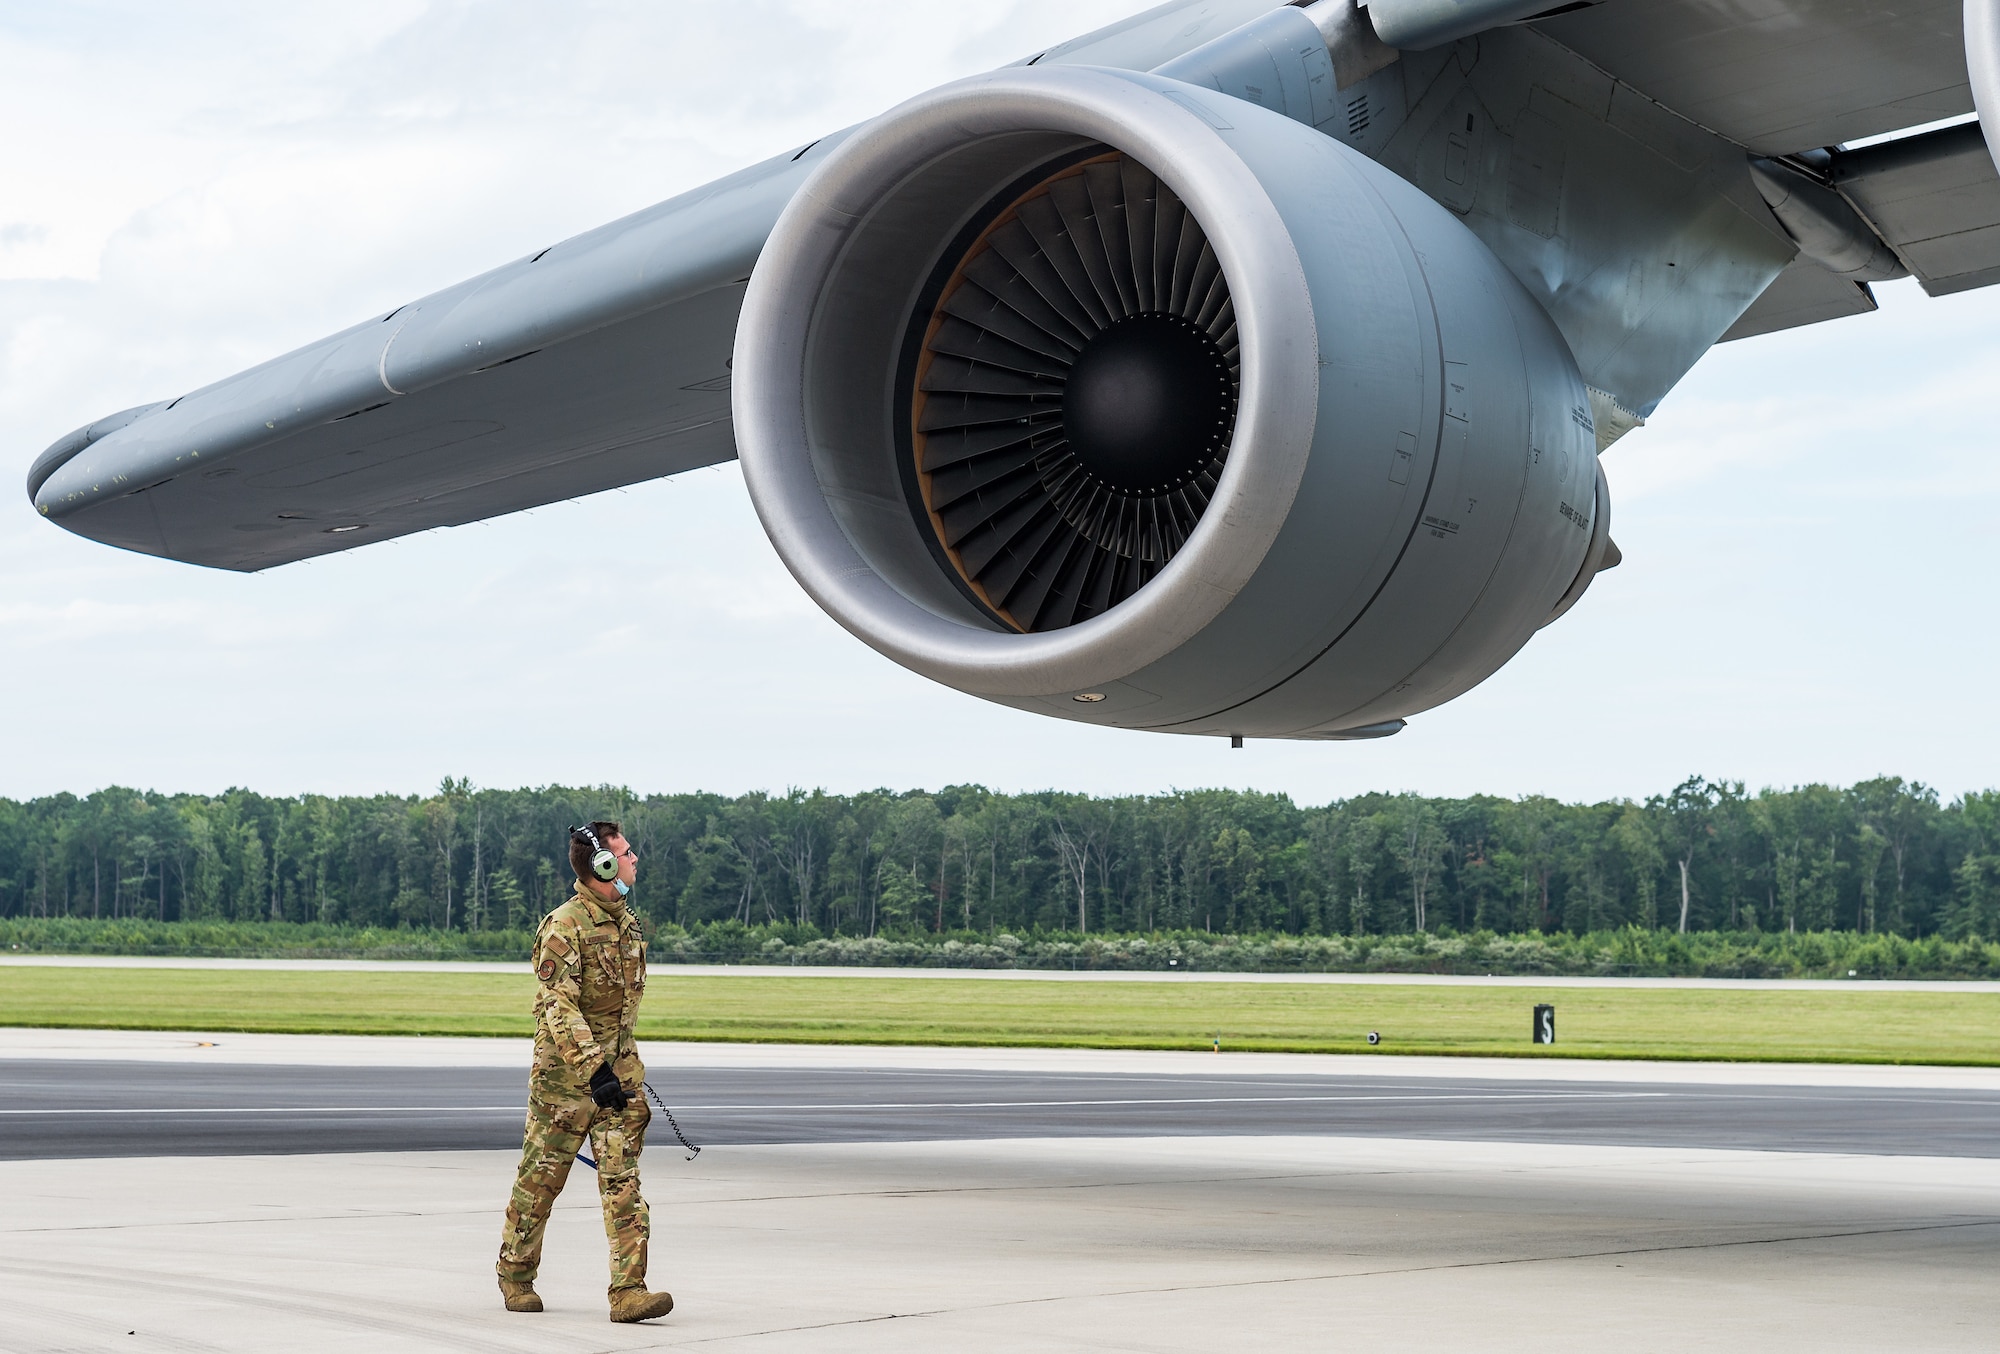 Staff Sgt. Broden McDonald, 9th Airlift Squadron flight engineer, looks at a C-5M Super Galaxy engine while performing a preflight inspection at Dover Air Force Base, Delaware, Aug. 18, 2021. The C-5M has four F-138-GE100 General Electric engines, each capable of producing 51,250 pounds of thrust. The Super Galaxy is a strategic transport aircraft and is the largest aircraft in the U.S. Air Force inventory. (U.S. Air Force photo by Roland Balik)